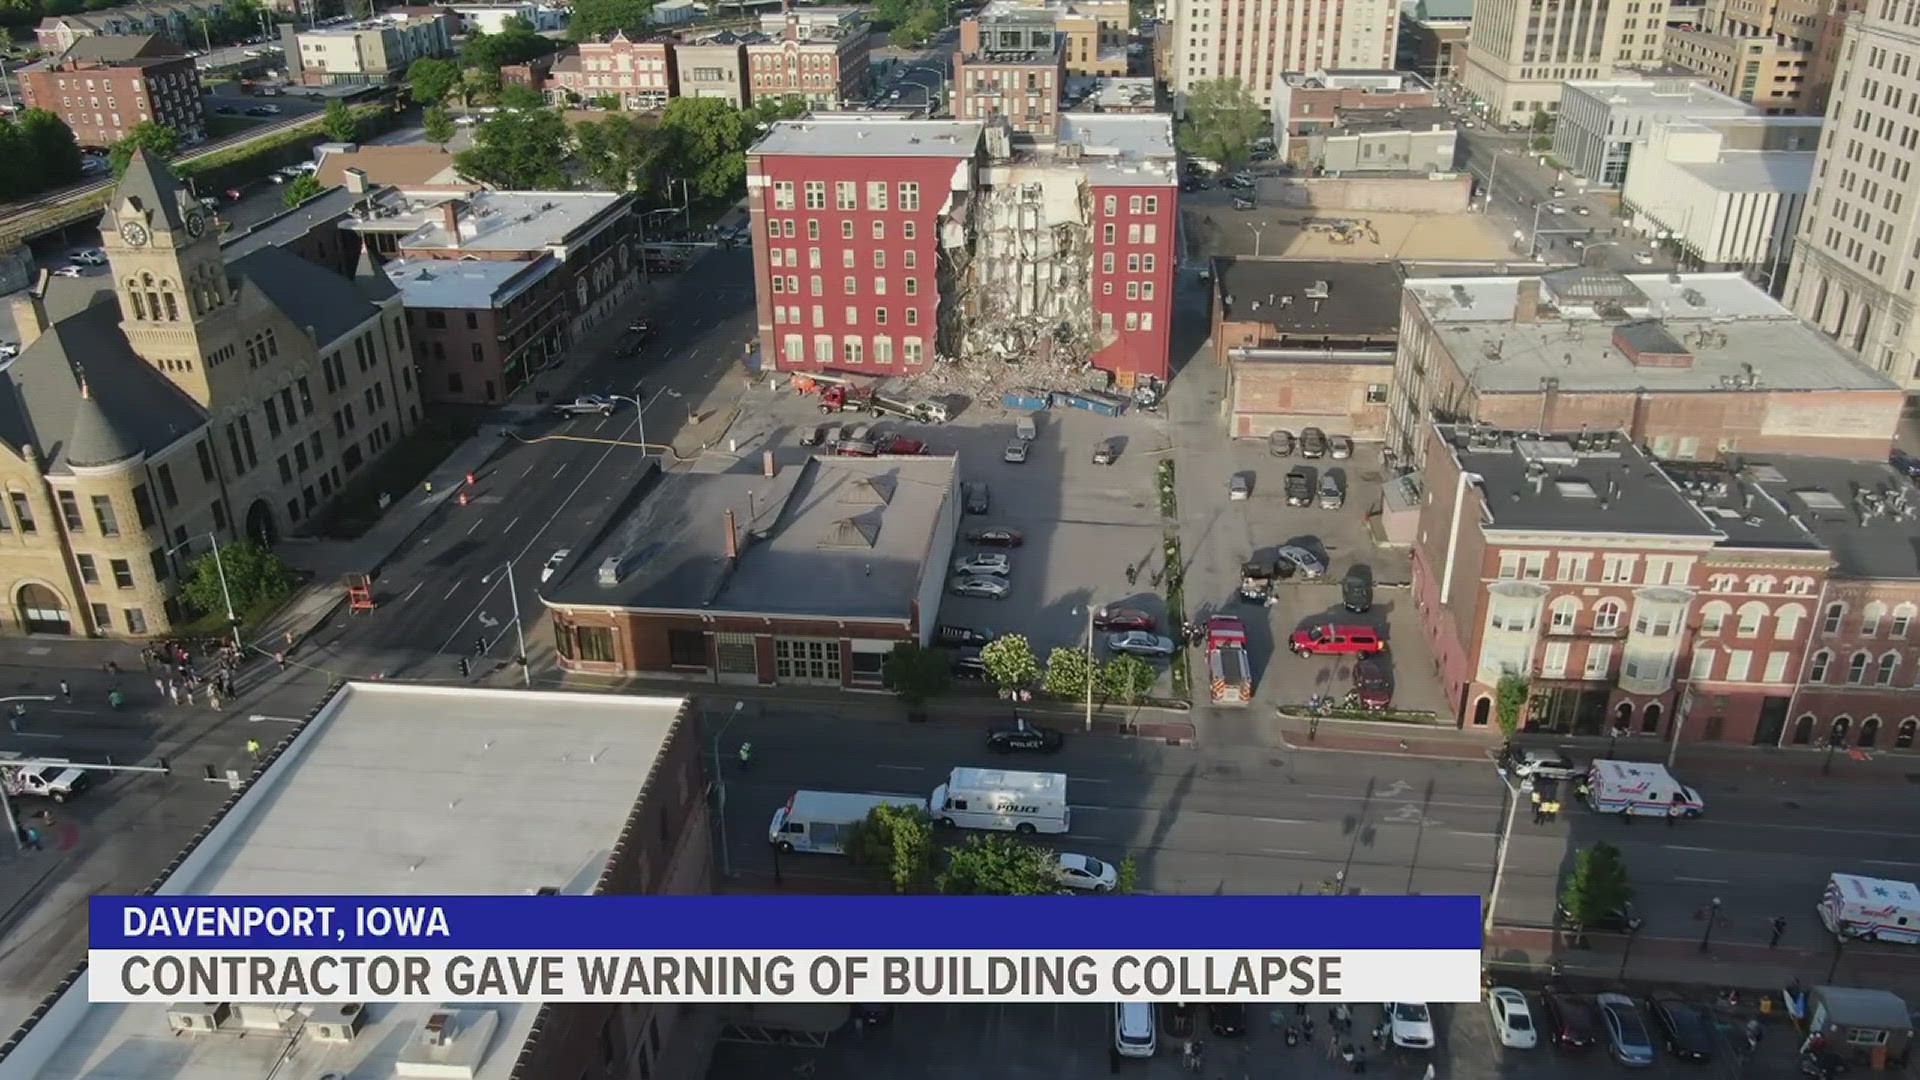 The co-owner of R.A. Masonry said they were contacted to bid to work on the building, but owner Andrew Wold rejected it because it was too high.